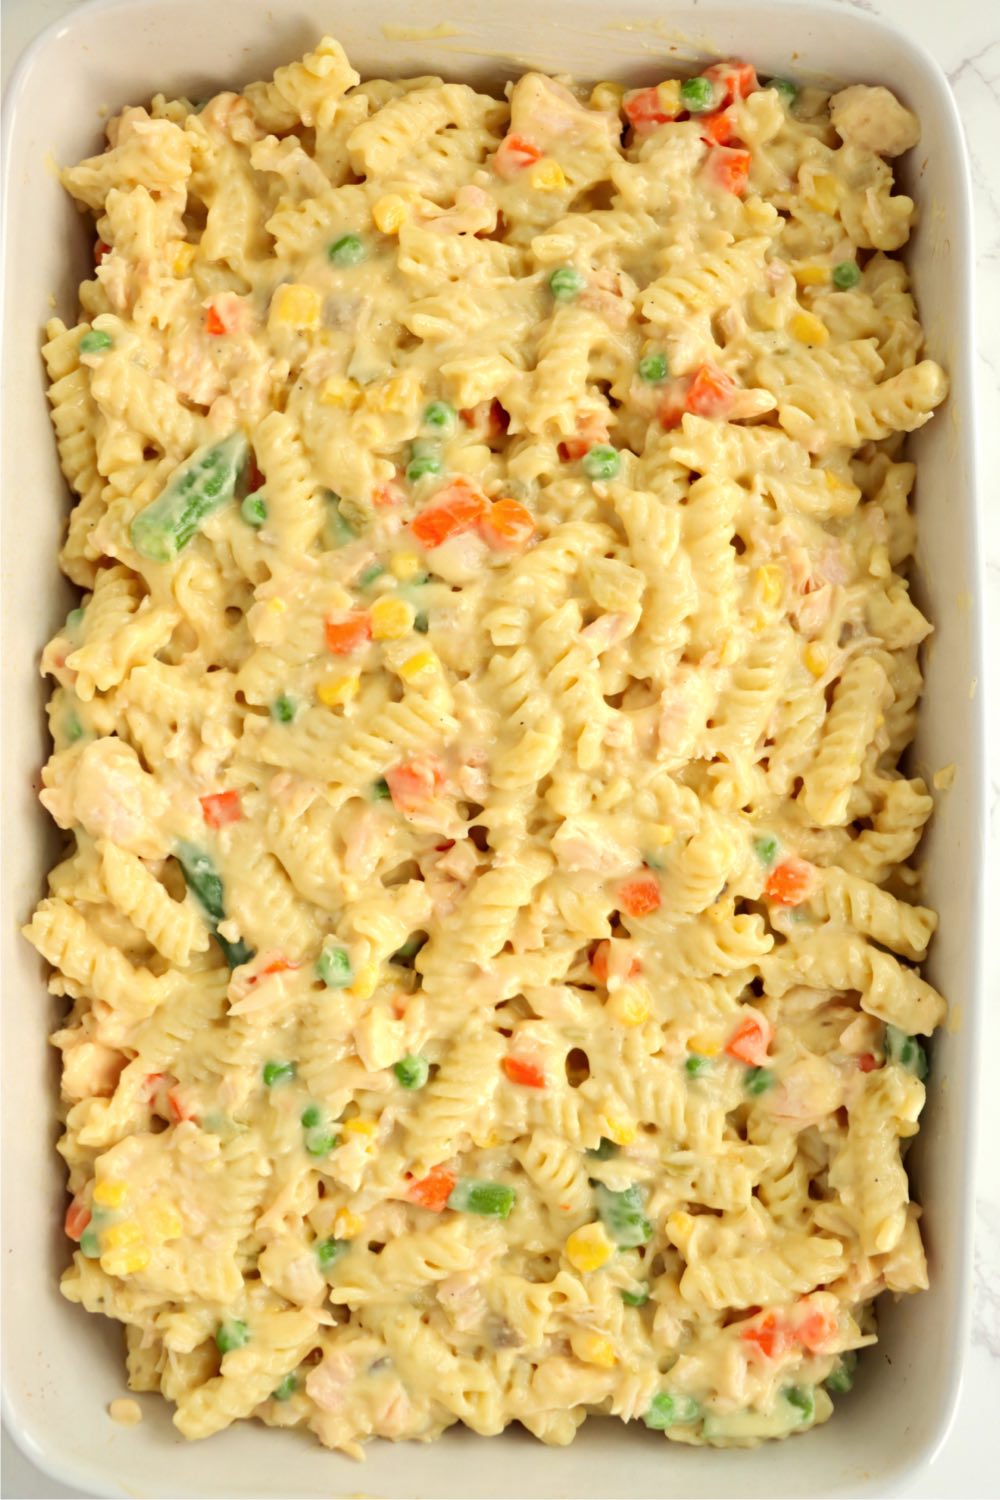 Noodles and vegetables spread out in a baking pan